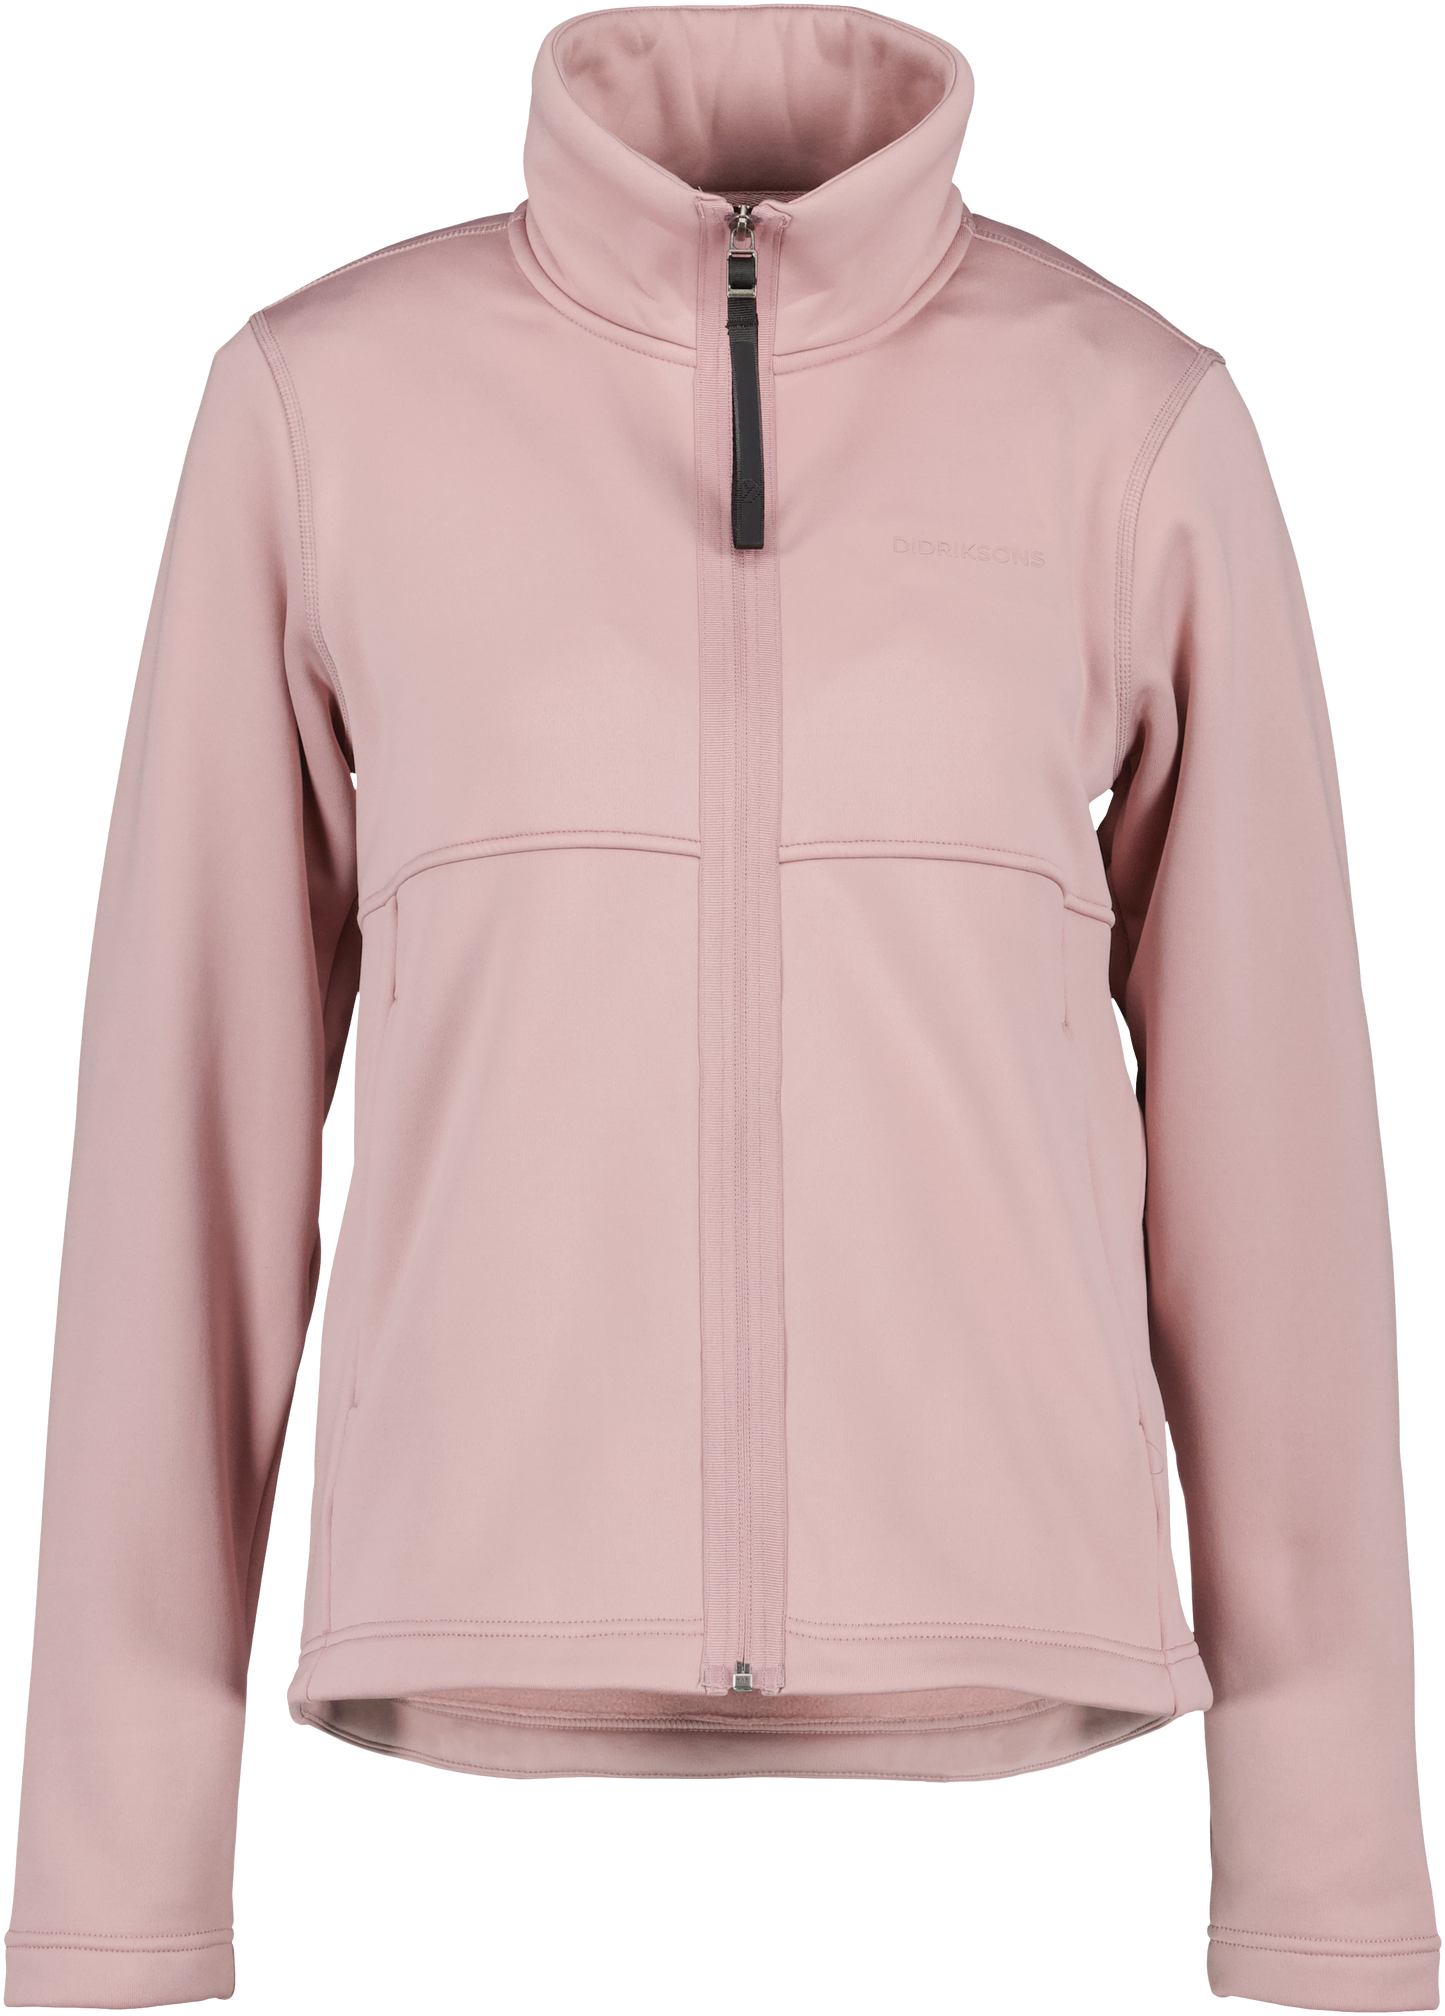 Leah  Fullzip - Oyster Lilac